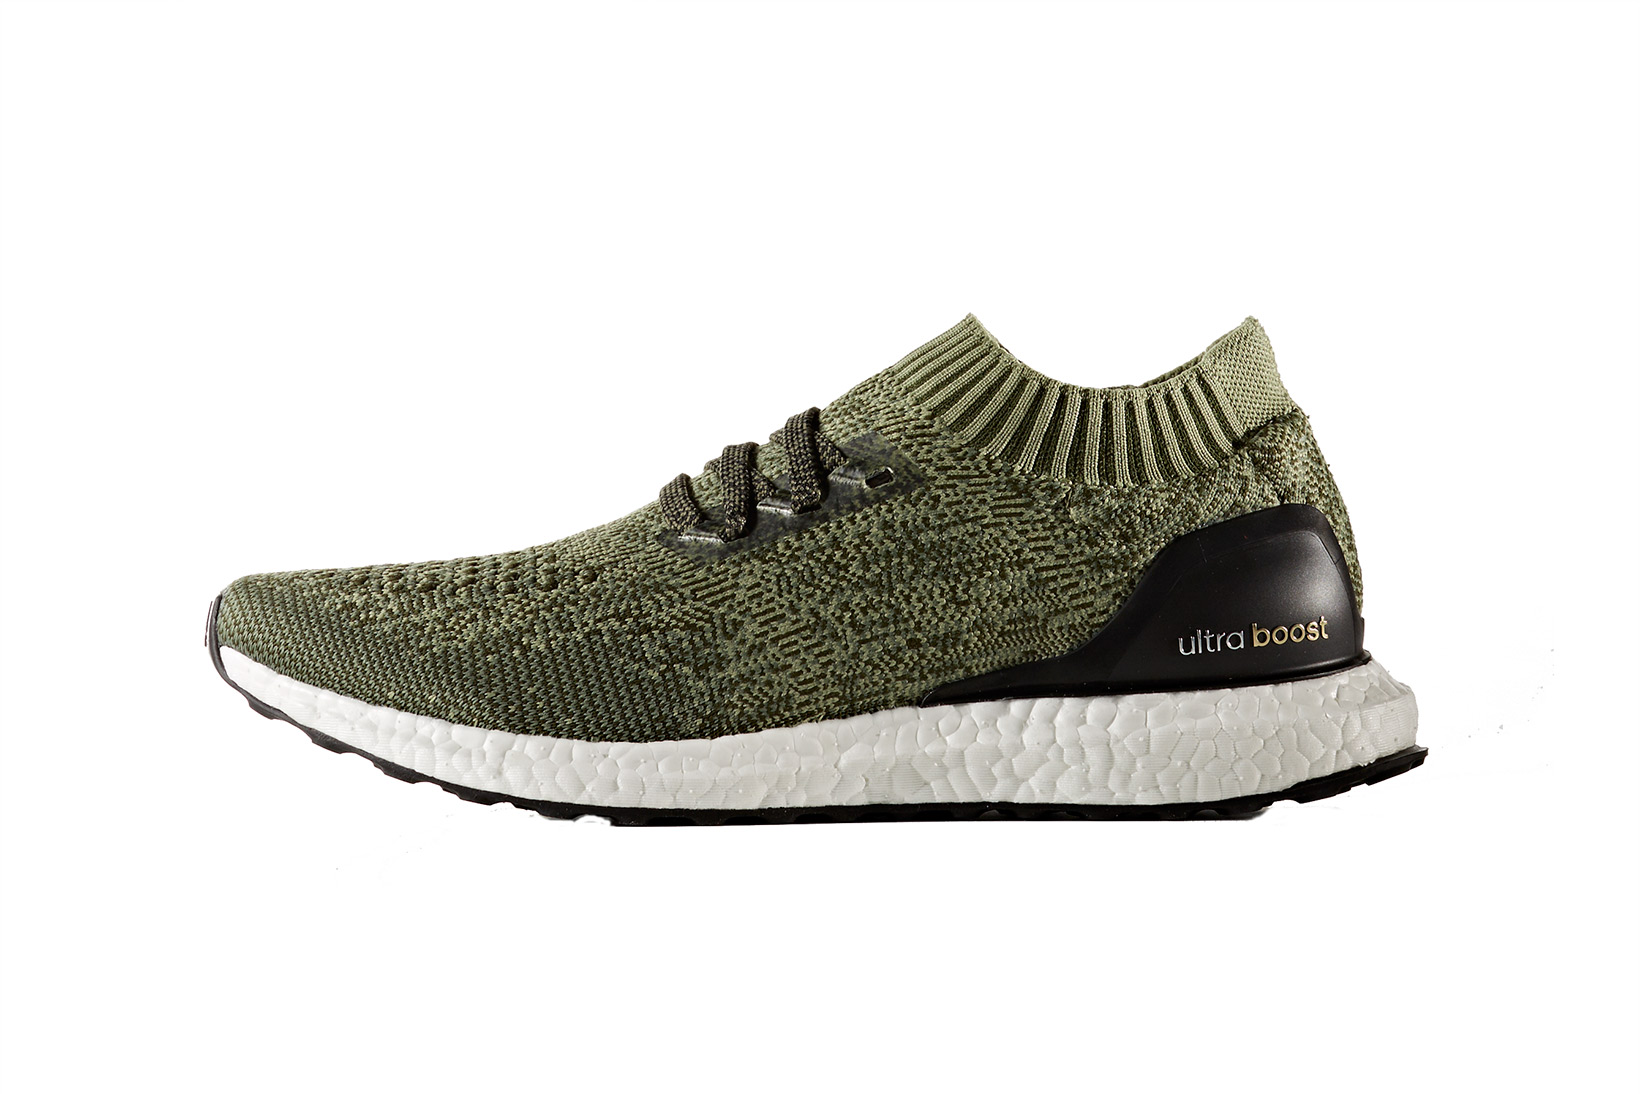 adidas Ultra Boost Uncaged Olive Navy and Sea Blue | HYPEBEAST